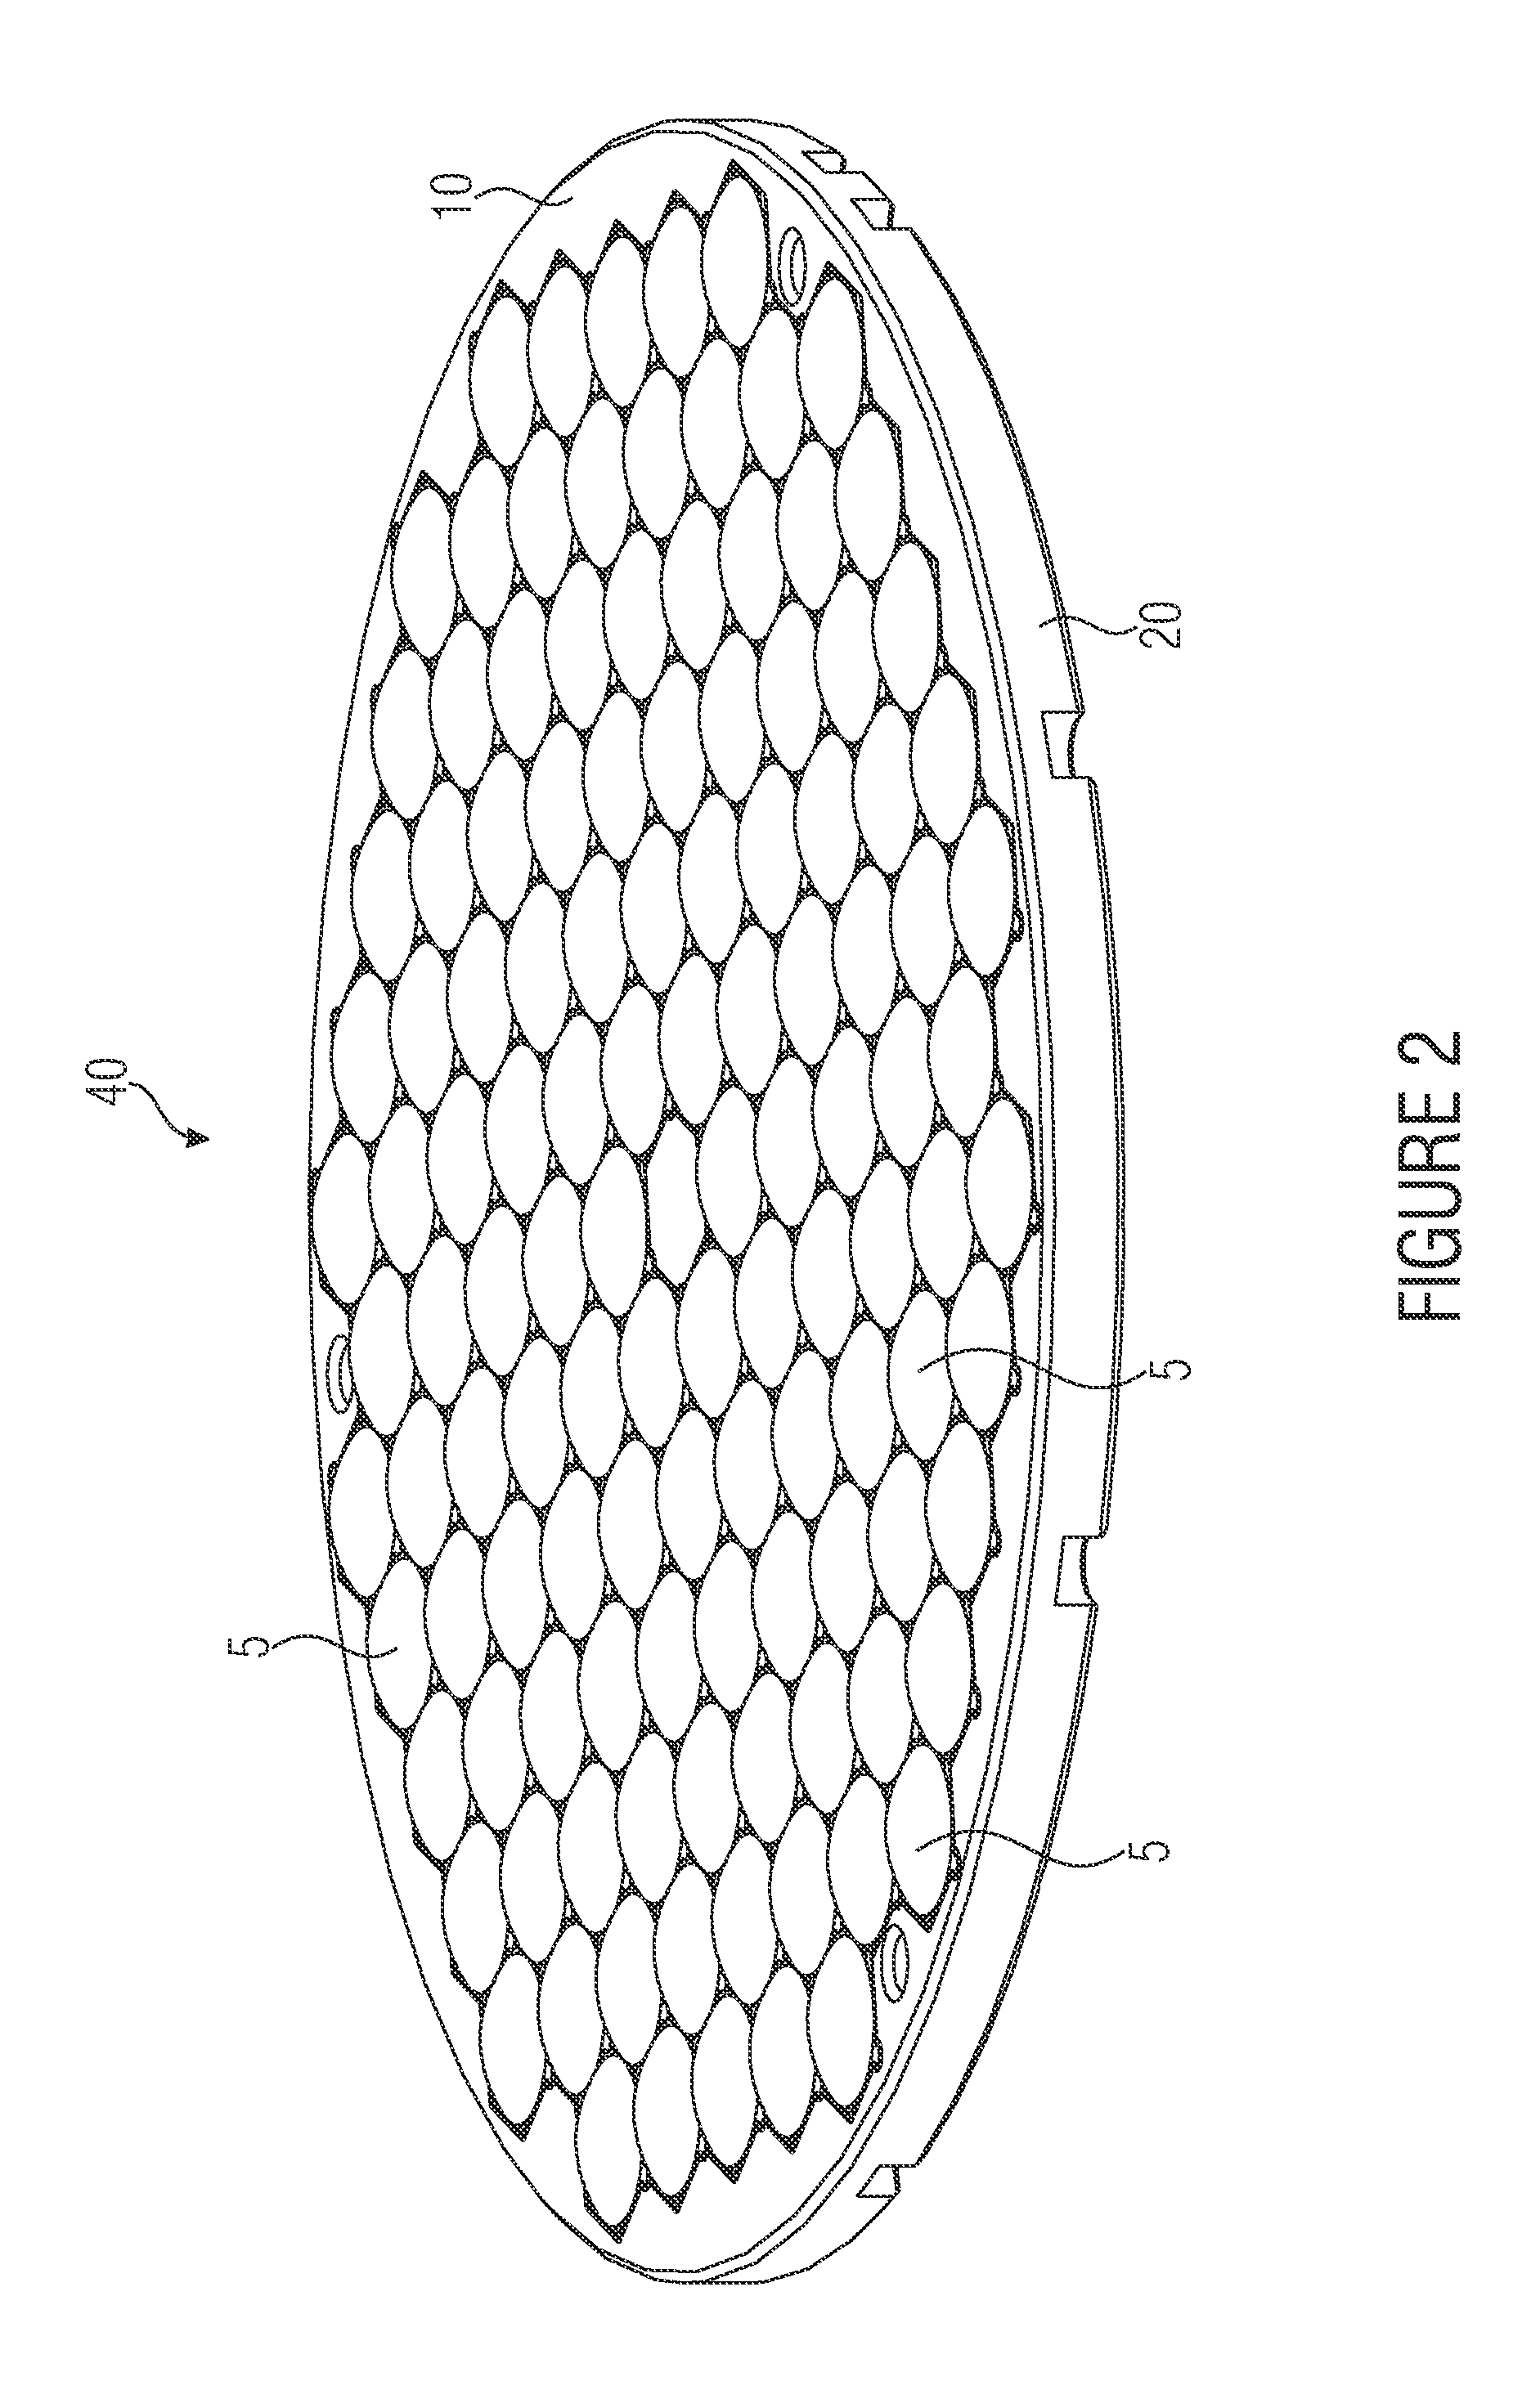 Support structure for a plurality of lenses, lens, lens system, and optical system